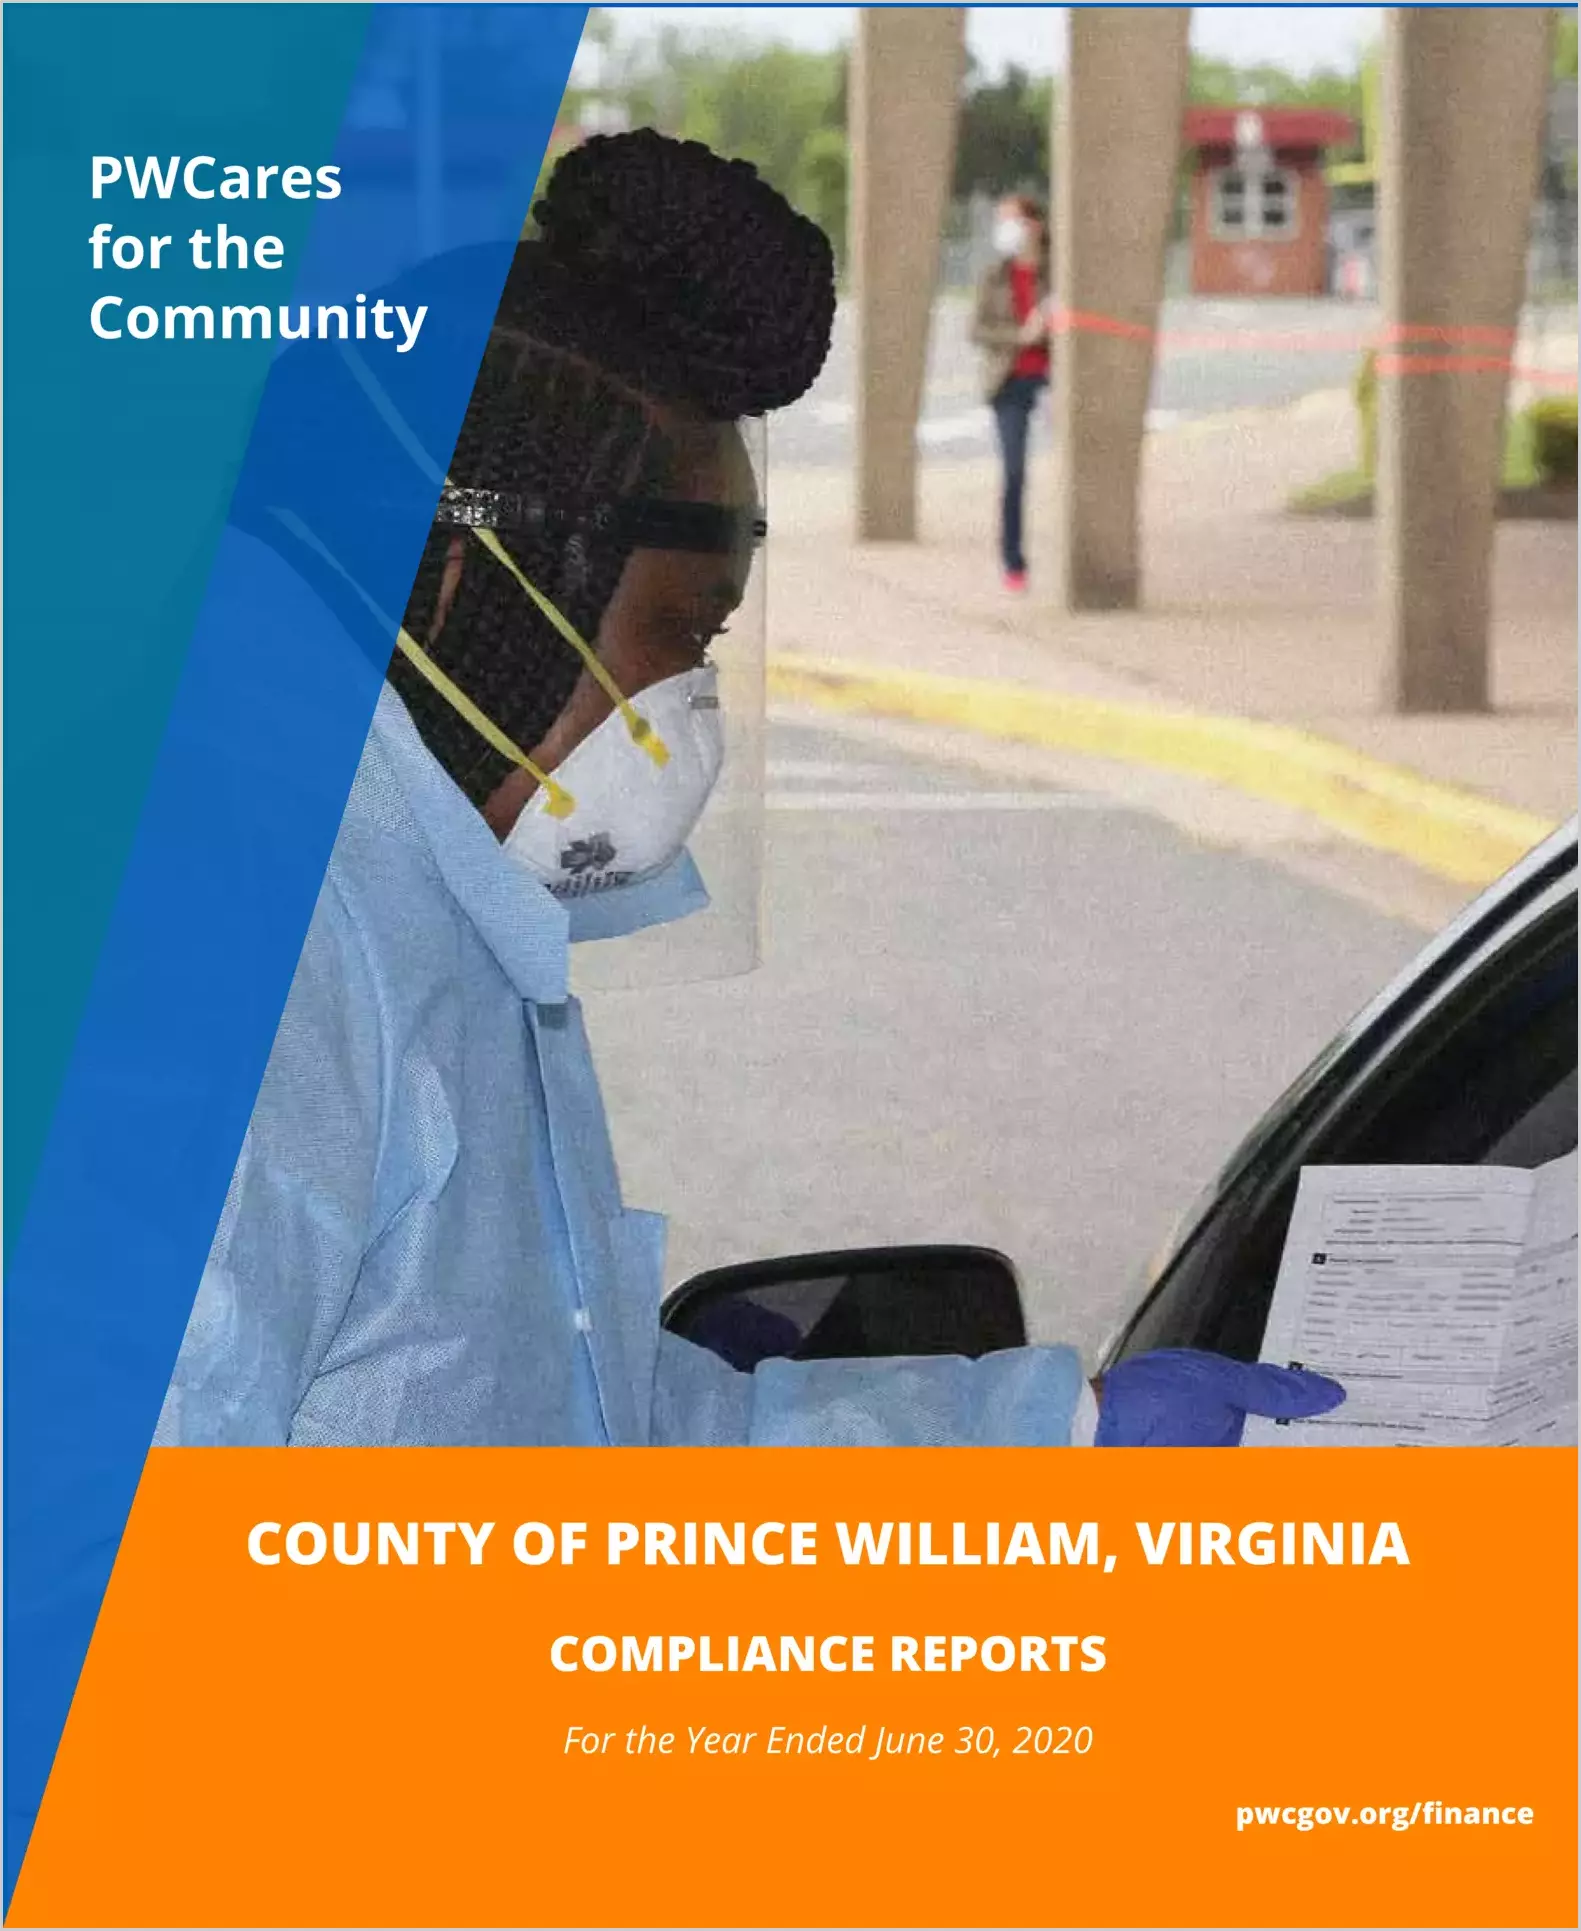 2020 Internal Control and Compliance Report for County of Prince William